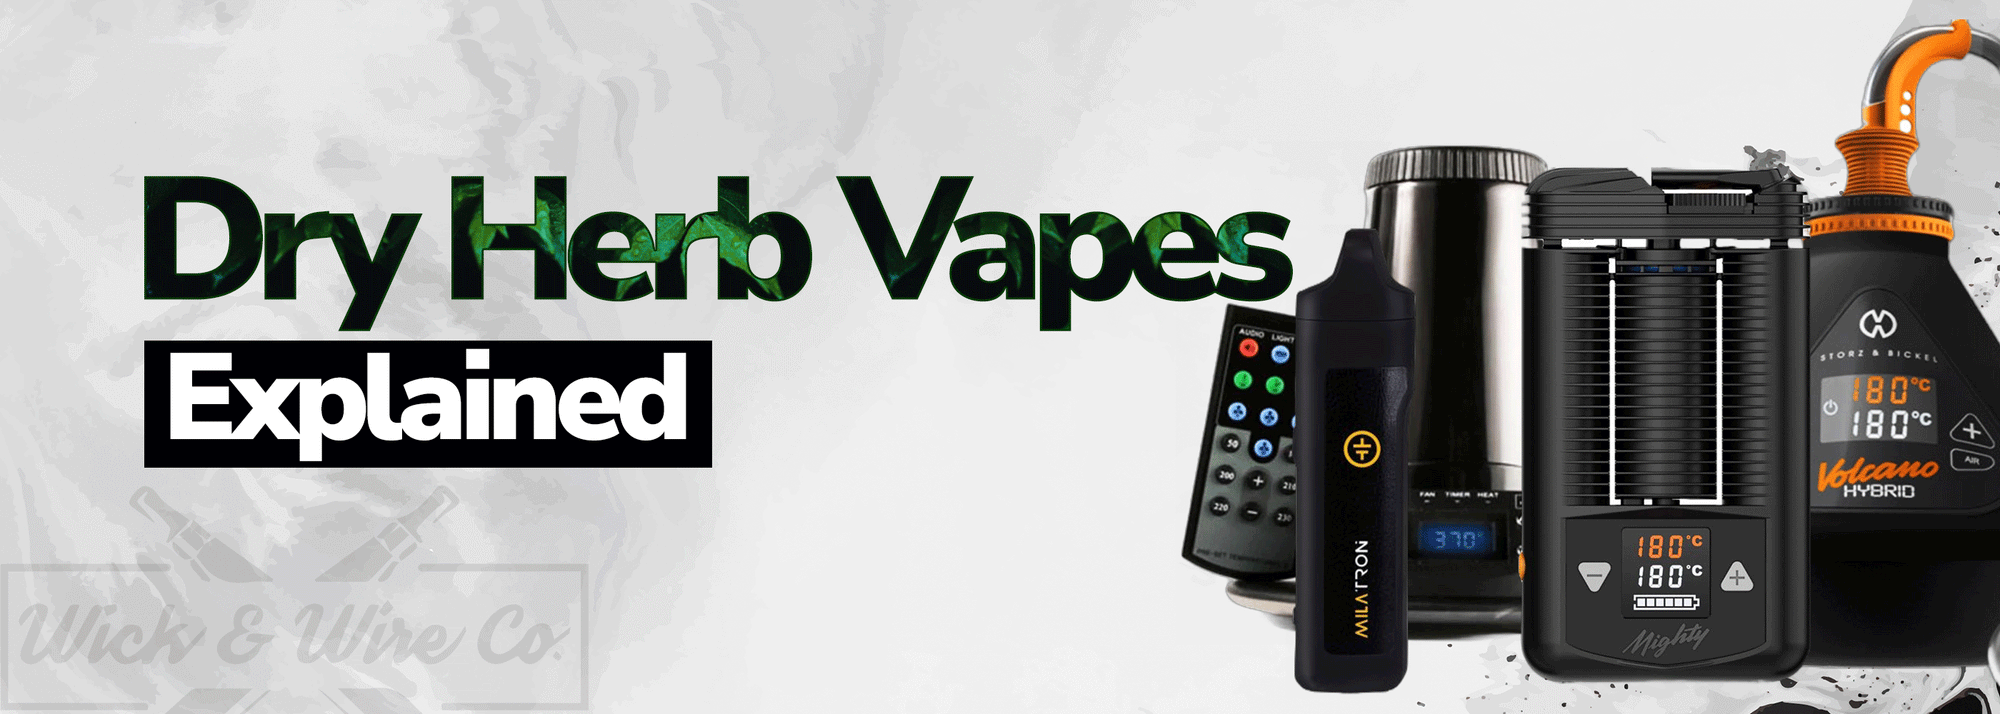 Where to buy Dry Herb Vapes - Wick and Wire Co Melbourne Vape Shop, Victoria Australia